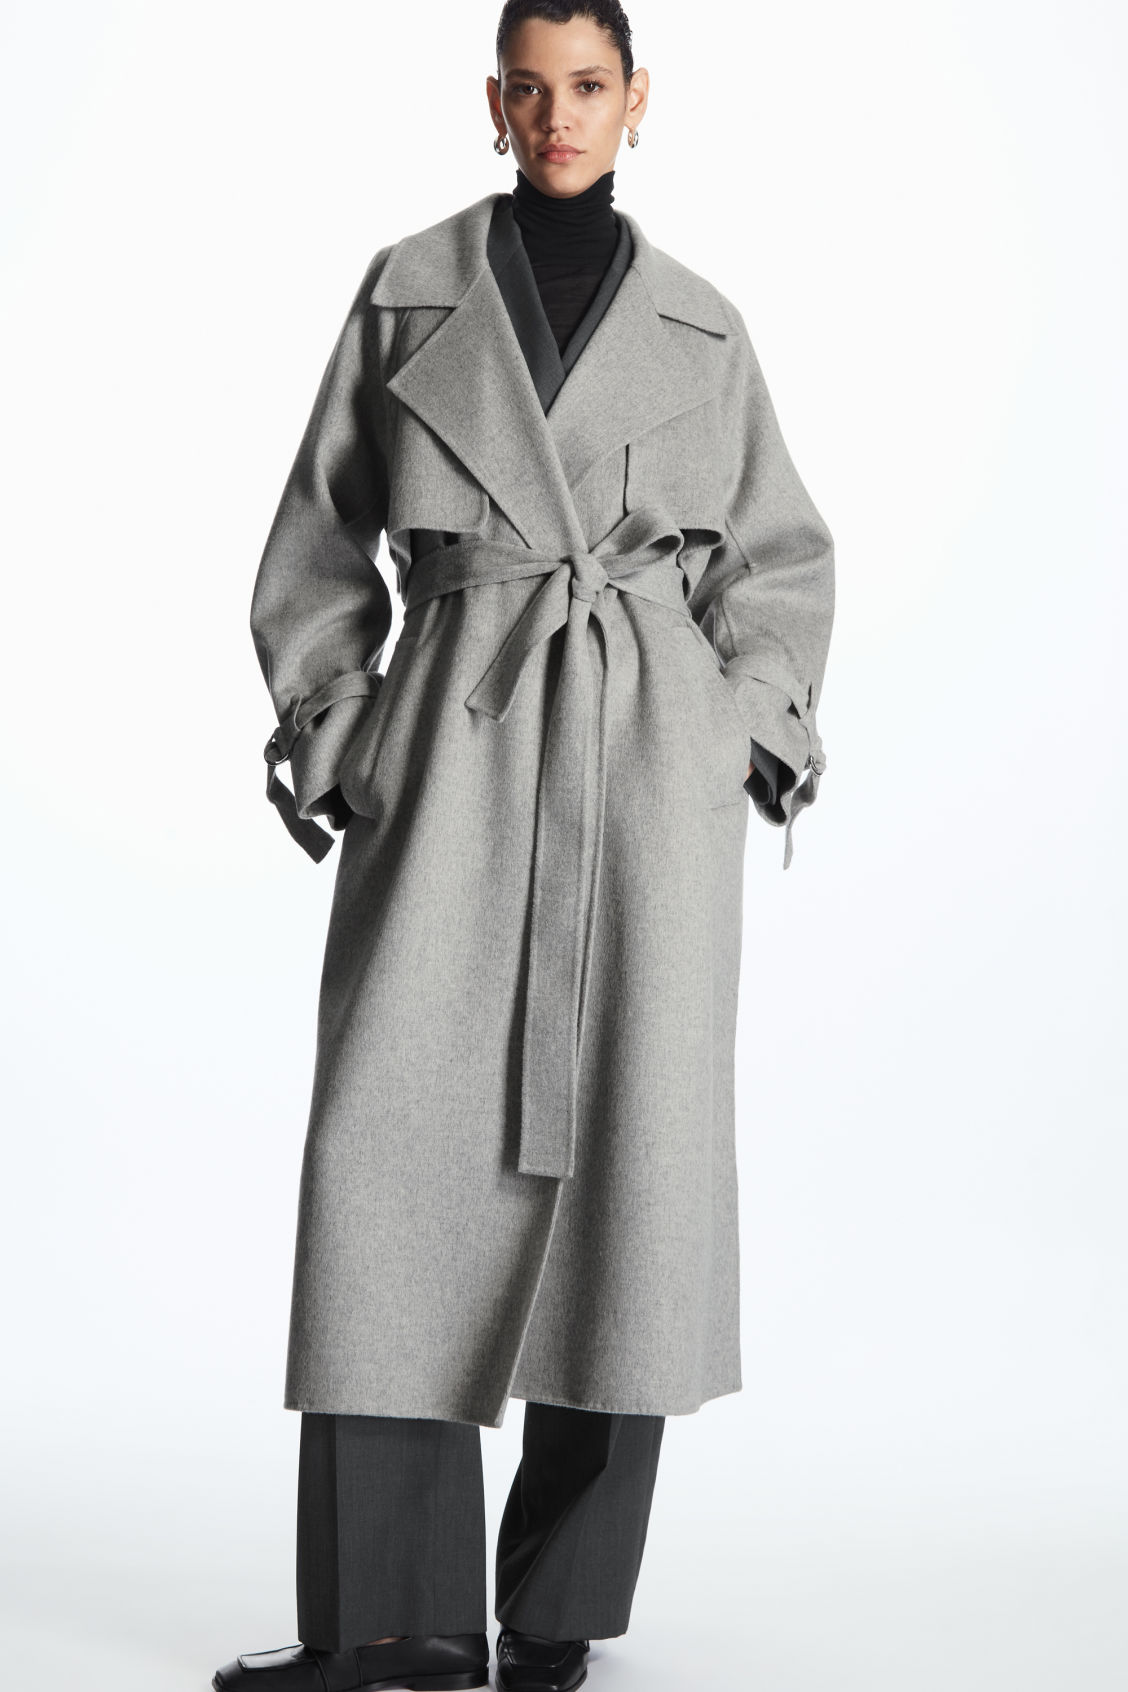 COS Online DOUBLE-FACED WOOL TRENCH COAT authentic 100% - Summer Sale